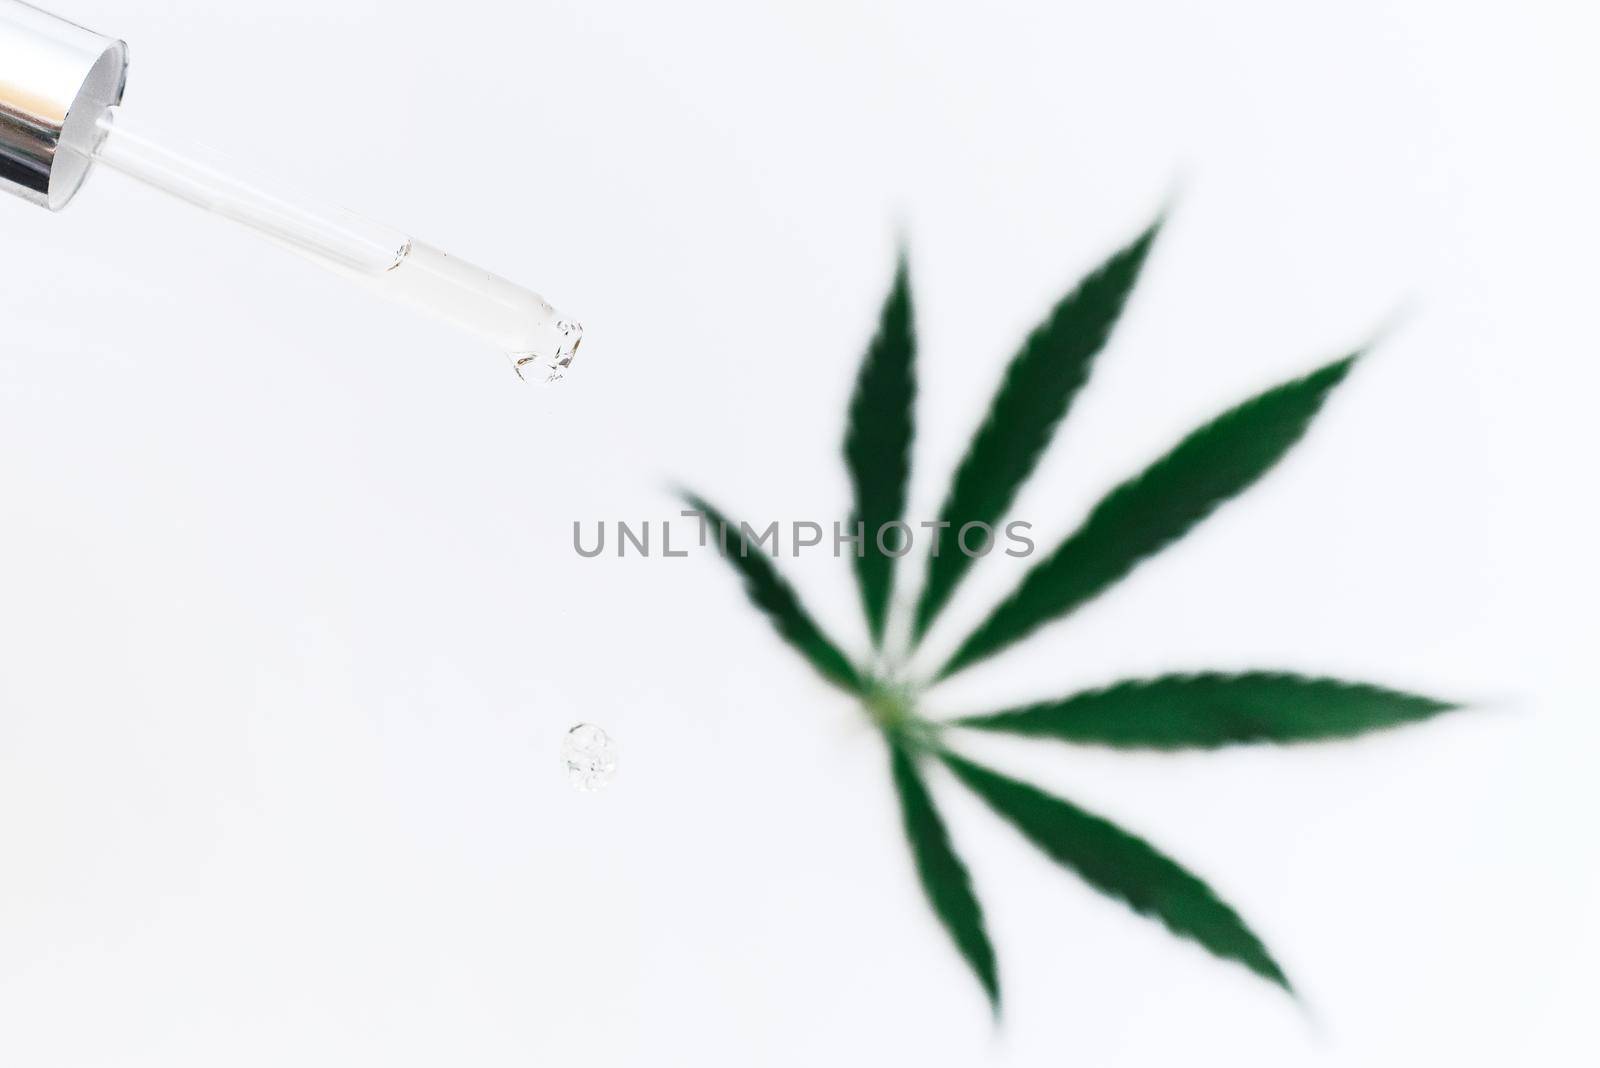 Pipette with a cosmetic product with hemp extract and cannabis leaf on a white background. A drop of cosmetic CBD oil falls from the pipette.